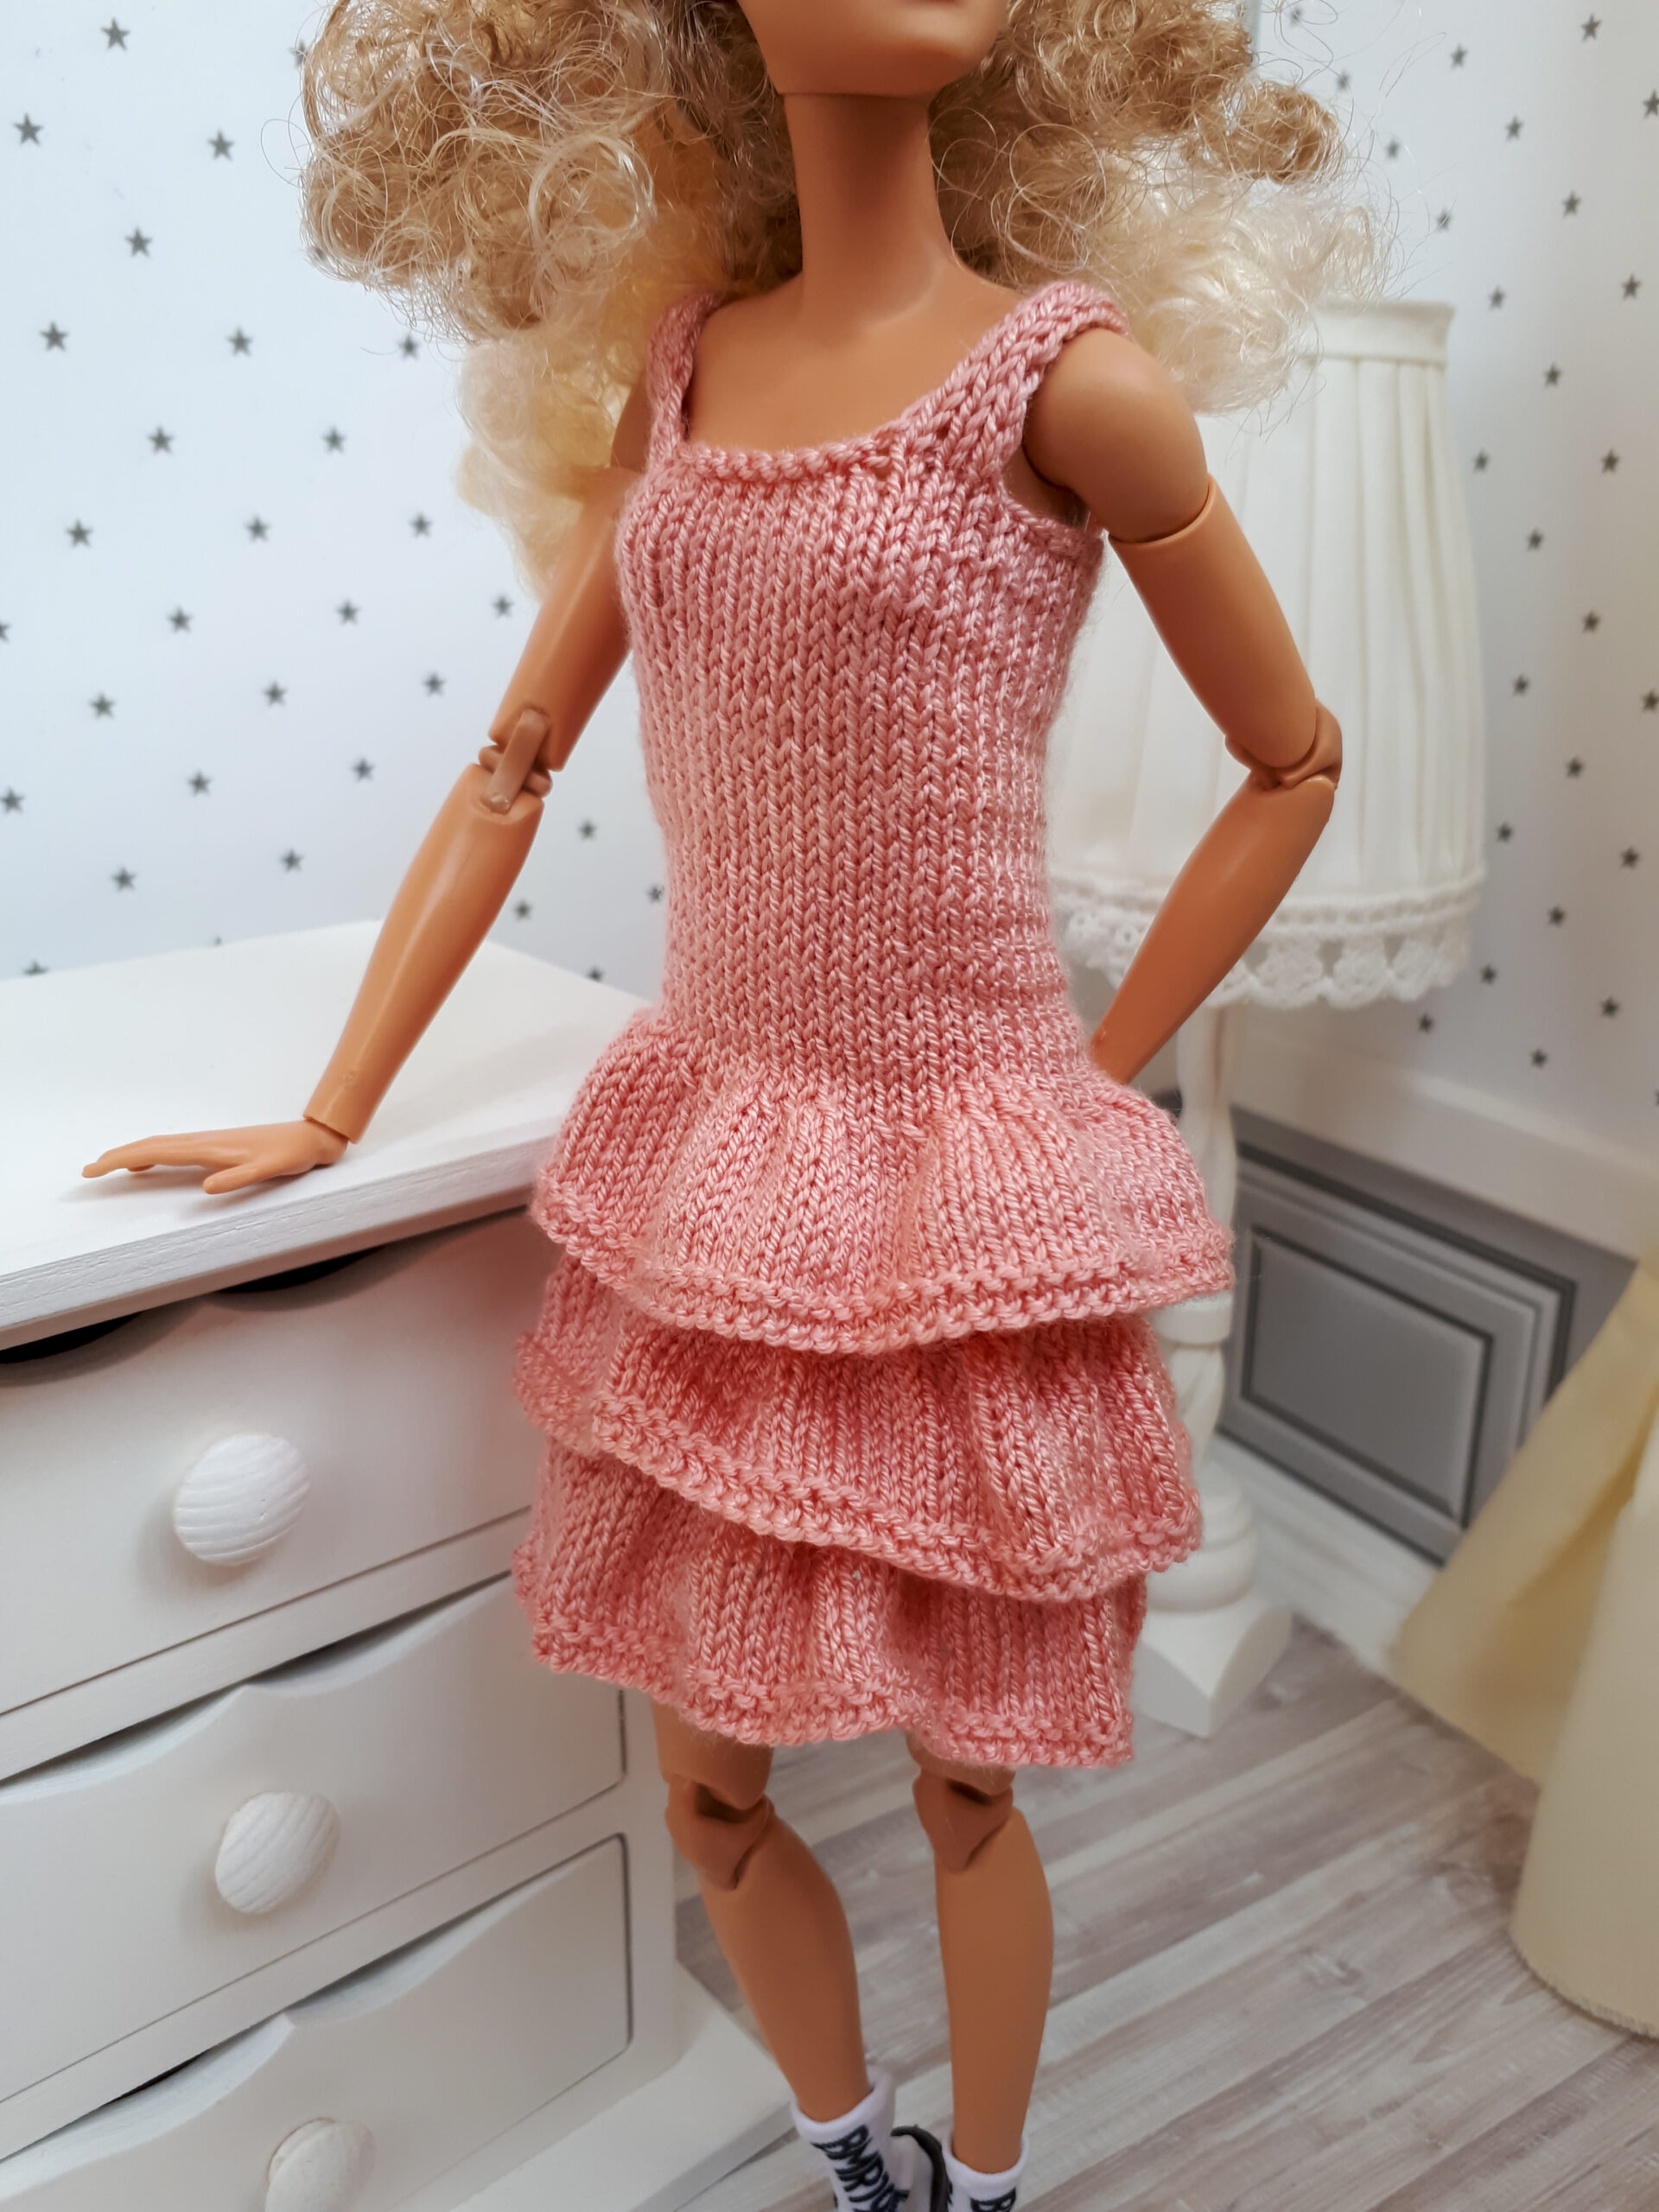 Free Printable Barbie Doll Ball Gown Pattern - Bing images | Barbie gowns, Barbie  clothes patterns, Barbie dress pattern